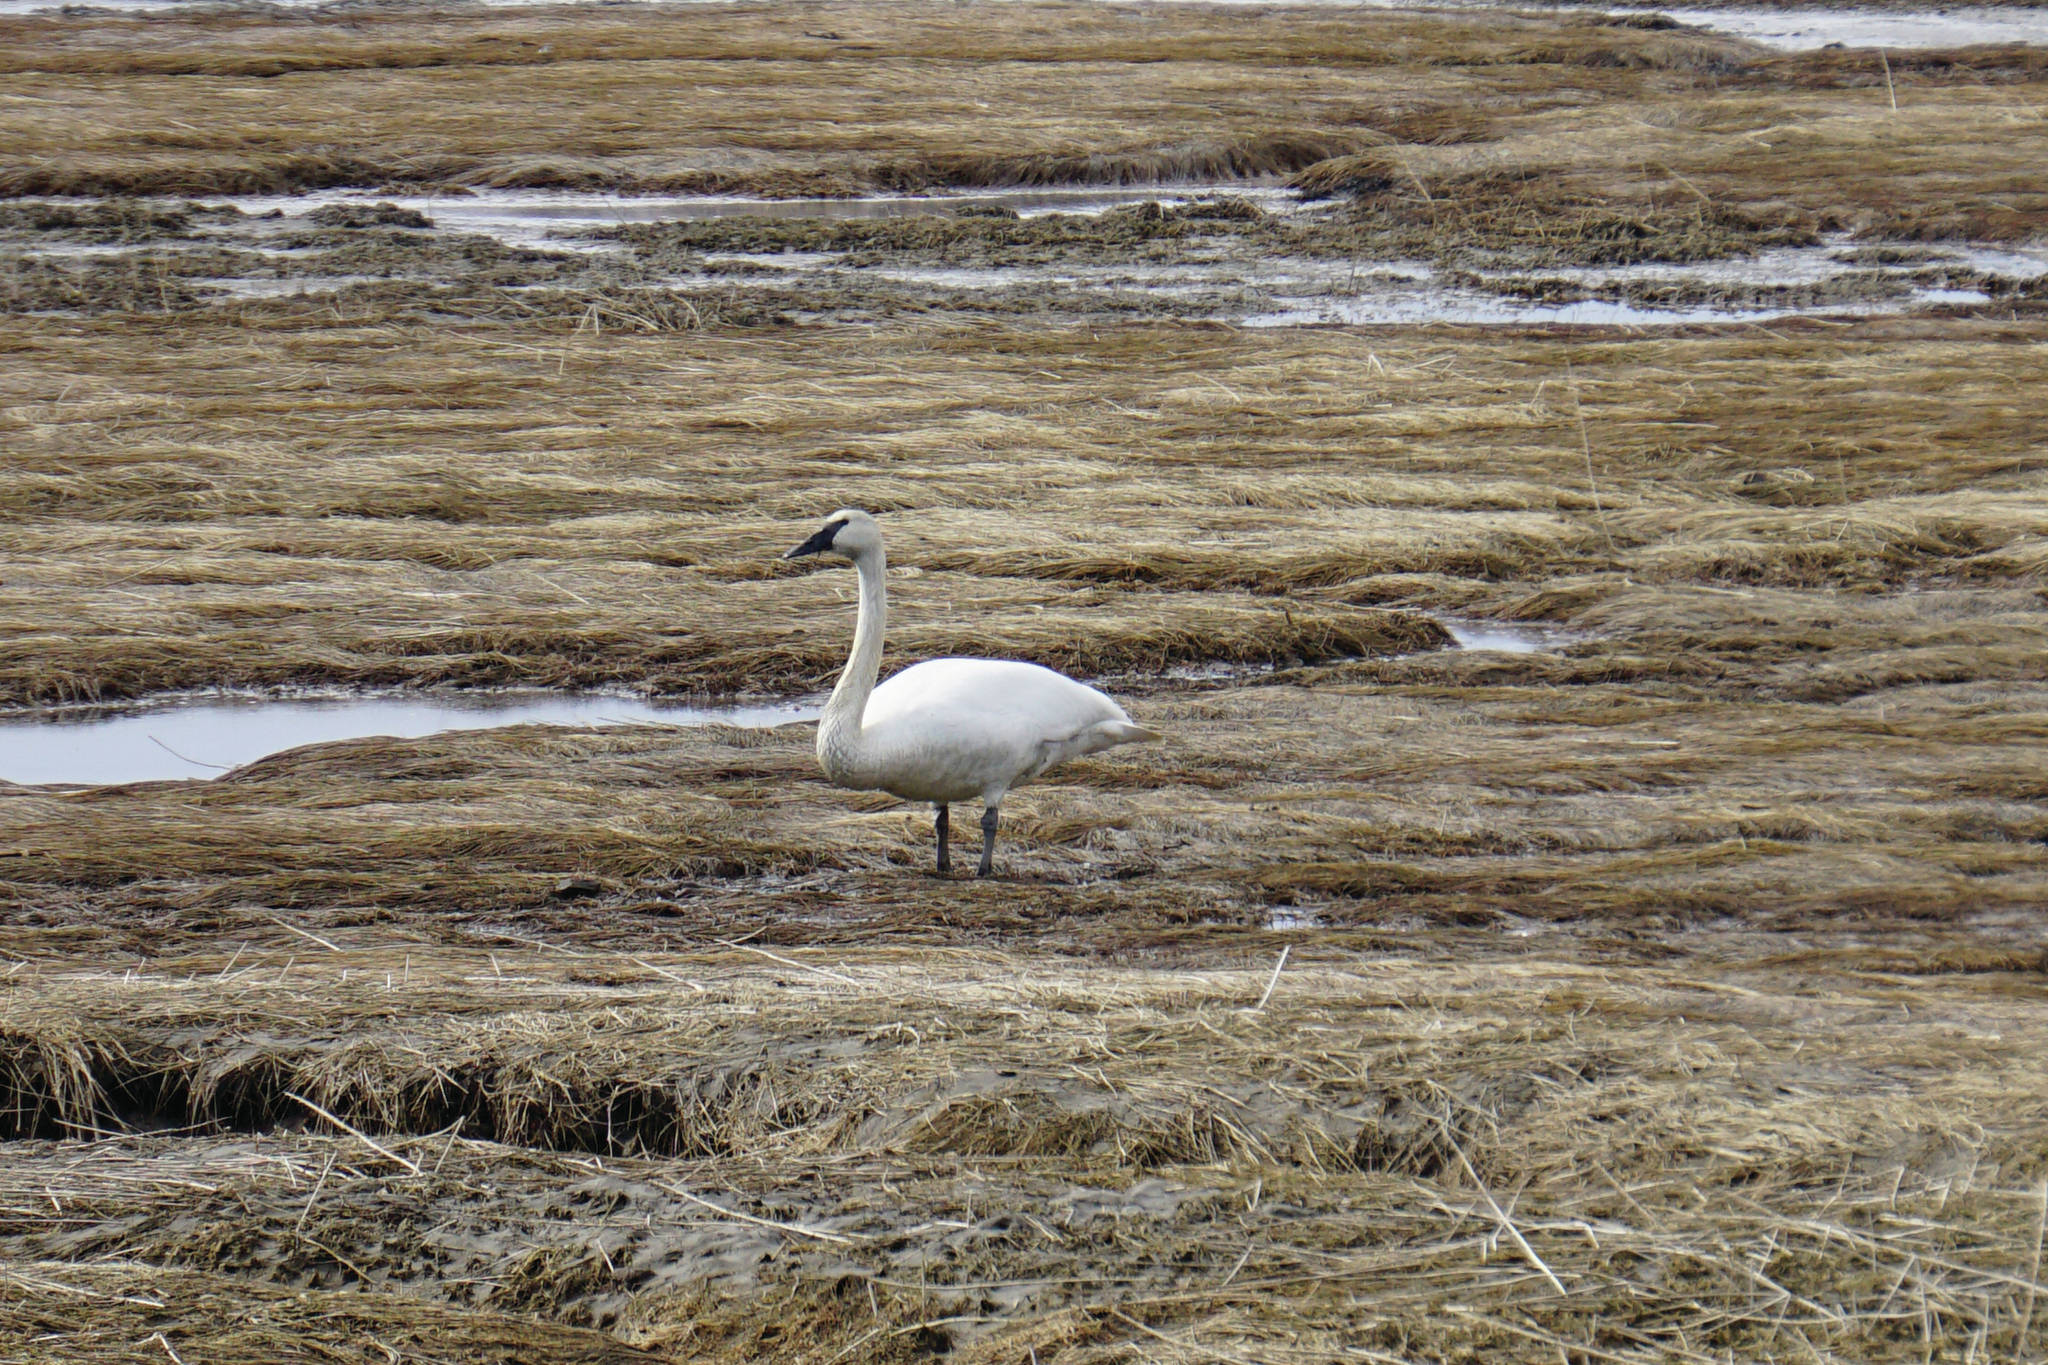 A trumpeter swan feeds in Beluga Slough on Monday, April 12, 2021, in Homer, Alaska. According to local birders, both tundra and trumpeter swans have been seen in the area the past week. (Photo by Michael Armstrong/Homer News)